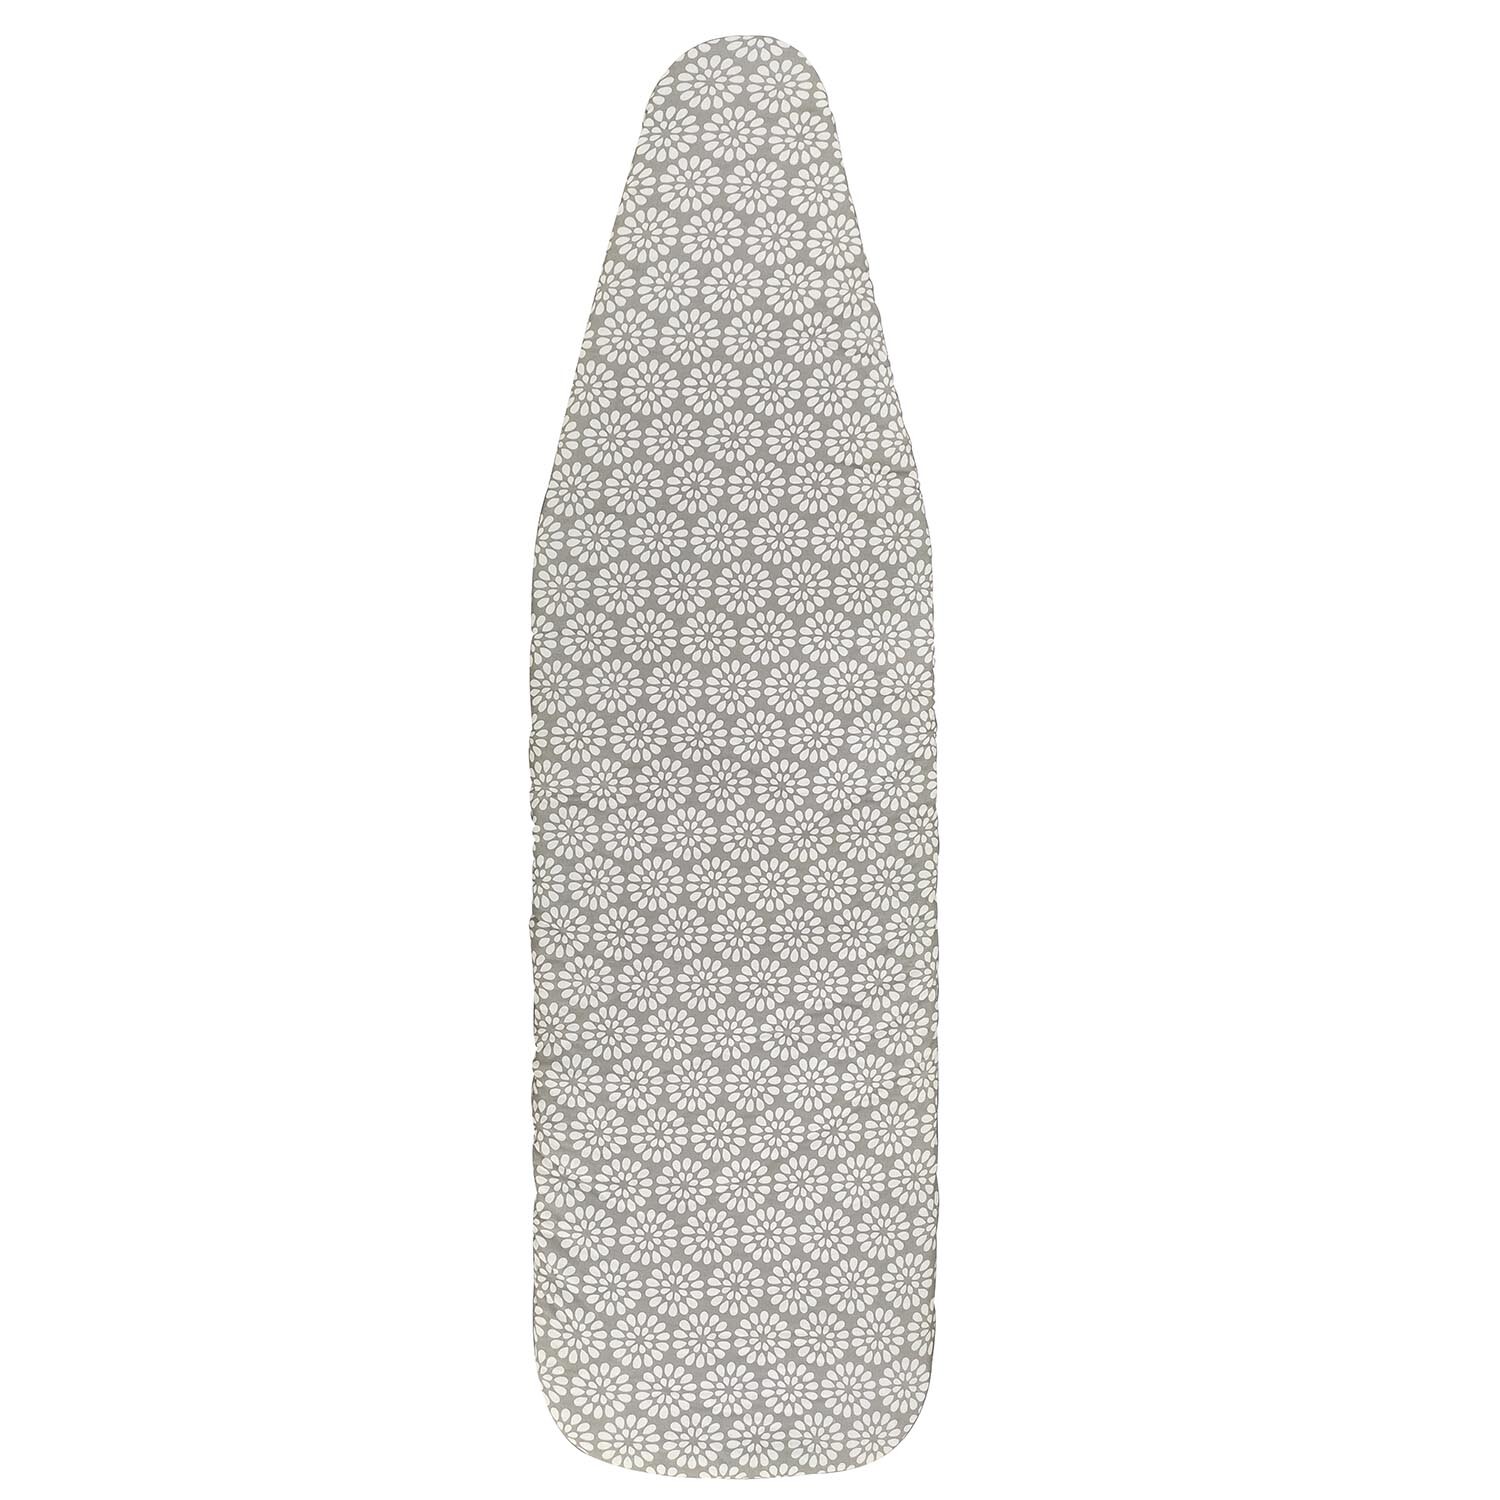 Ironing Board Cover - Small Image 1